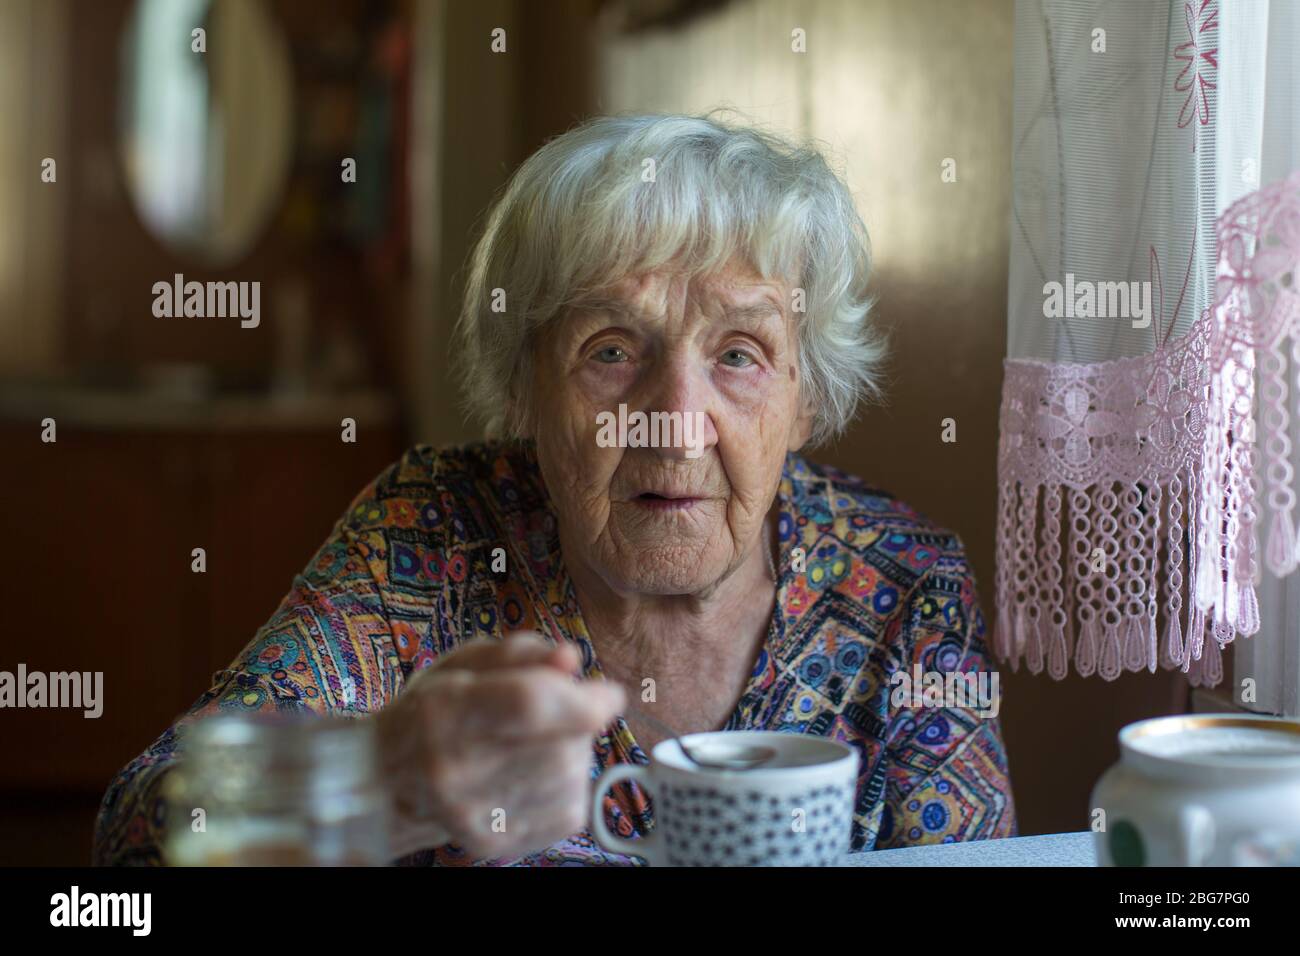 Portrait of an Old woman sitting in the her kitchen. Stock Photo